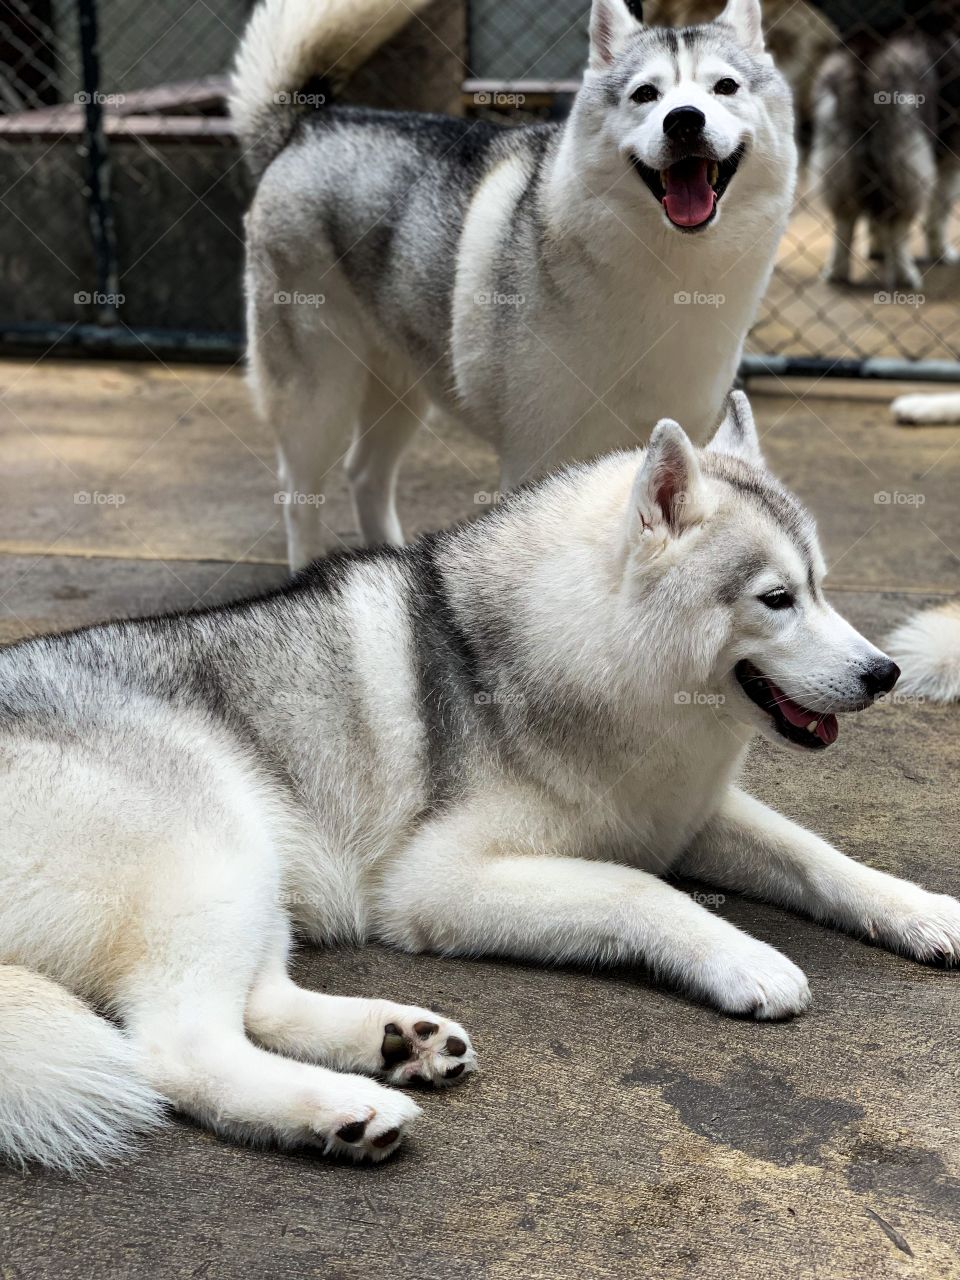 These majestic huskies are living in Husky cafe in Bangkok,Thailand! A private house off Soi Ari is a haven for dog lovers as you can stand in the middle of a backyard as 34 dogs play, doze off, or dart in every direction.